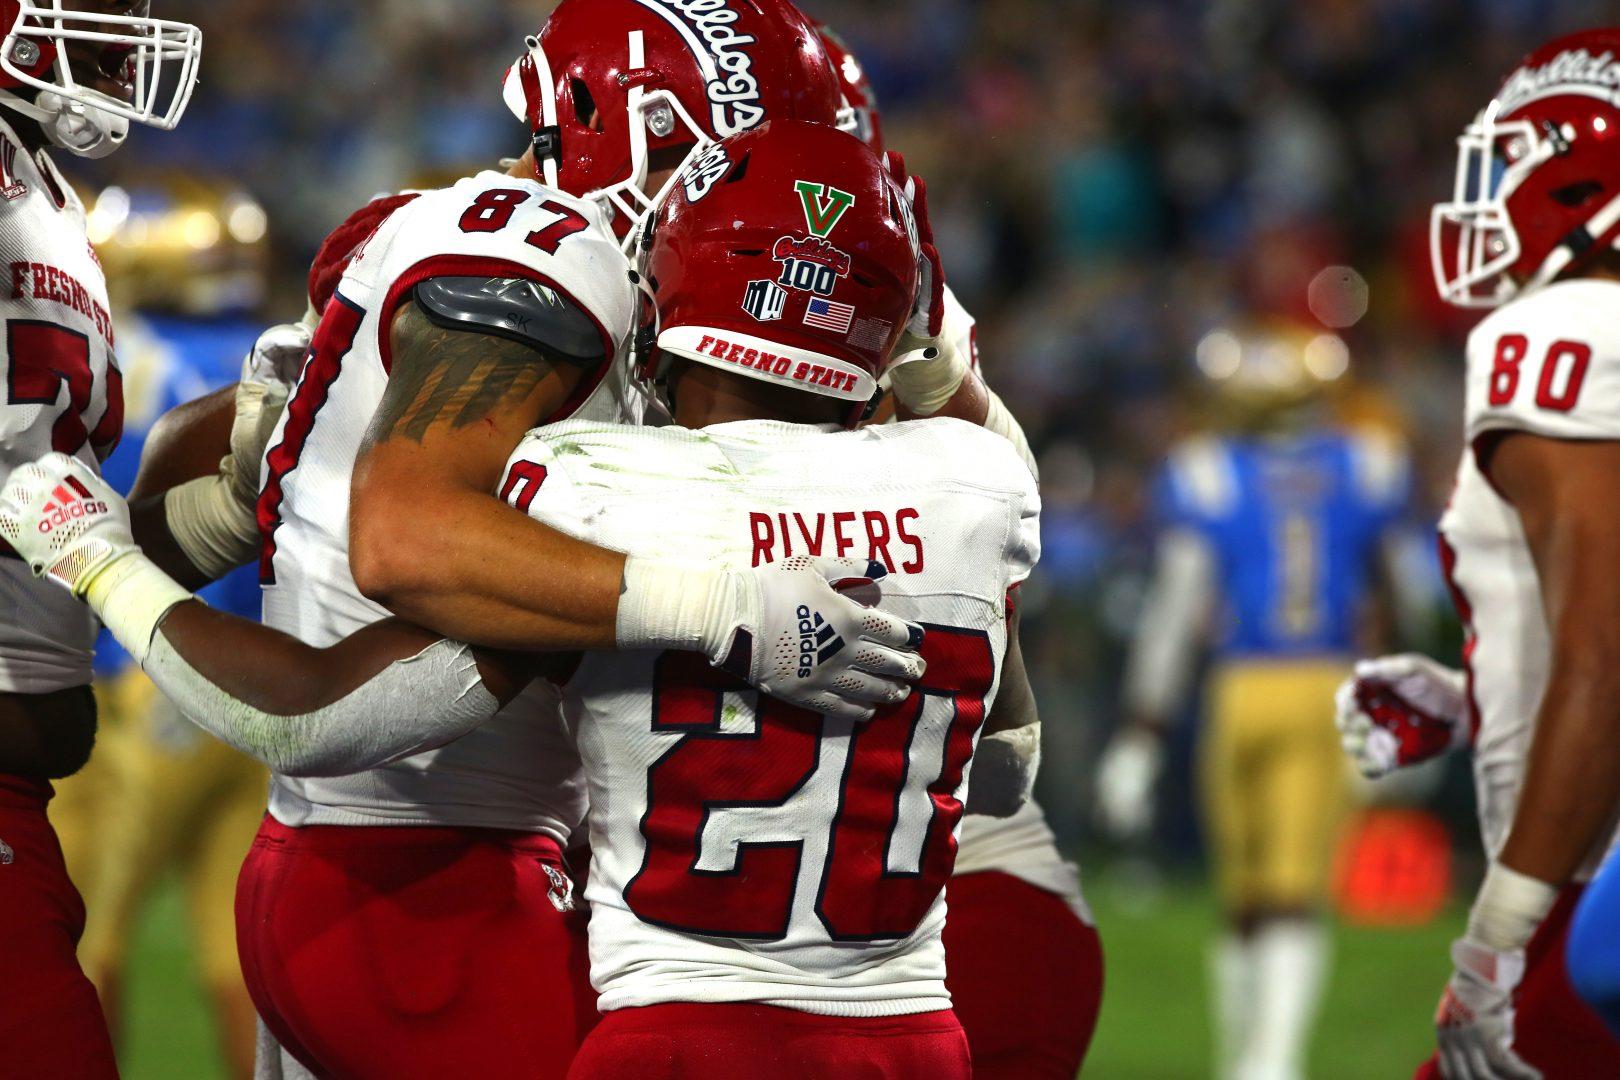 Ronnie Rivers celebrating with his teammate Raymond Pauwels Jr. after their
win against UCLA on Sept. 18, 2021. (Tyler Van Dyke/ The Collegian)